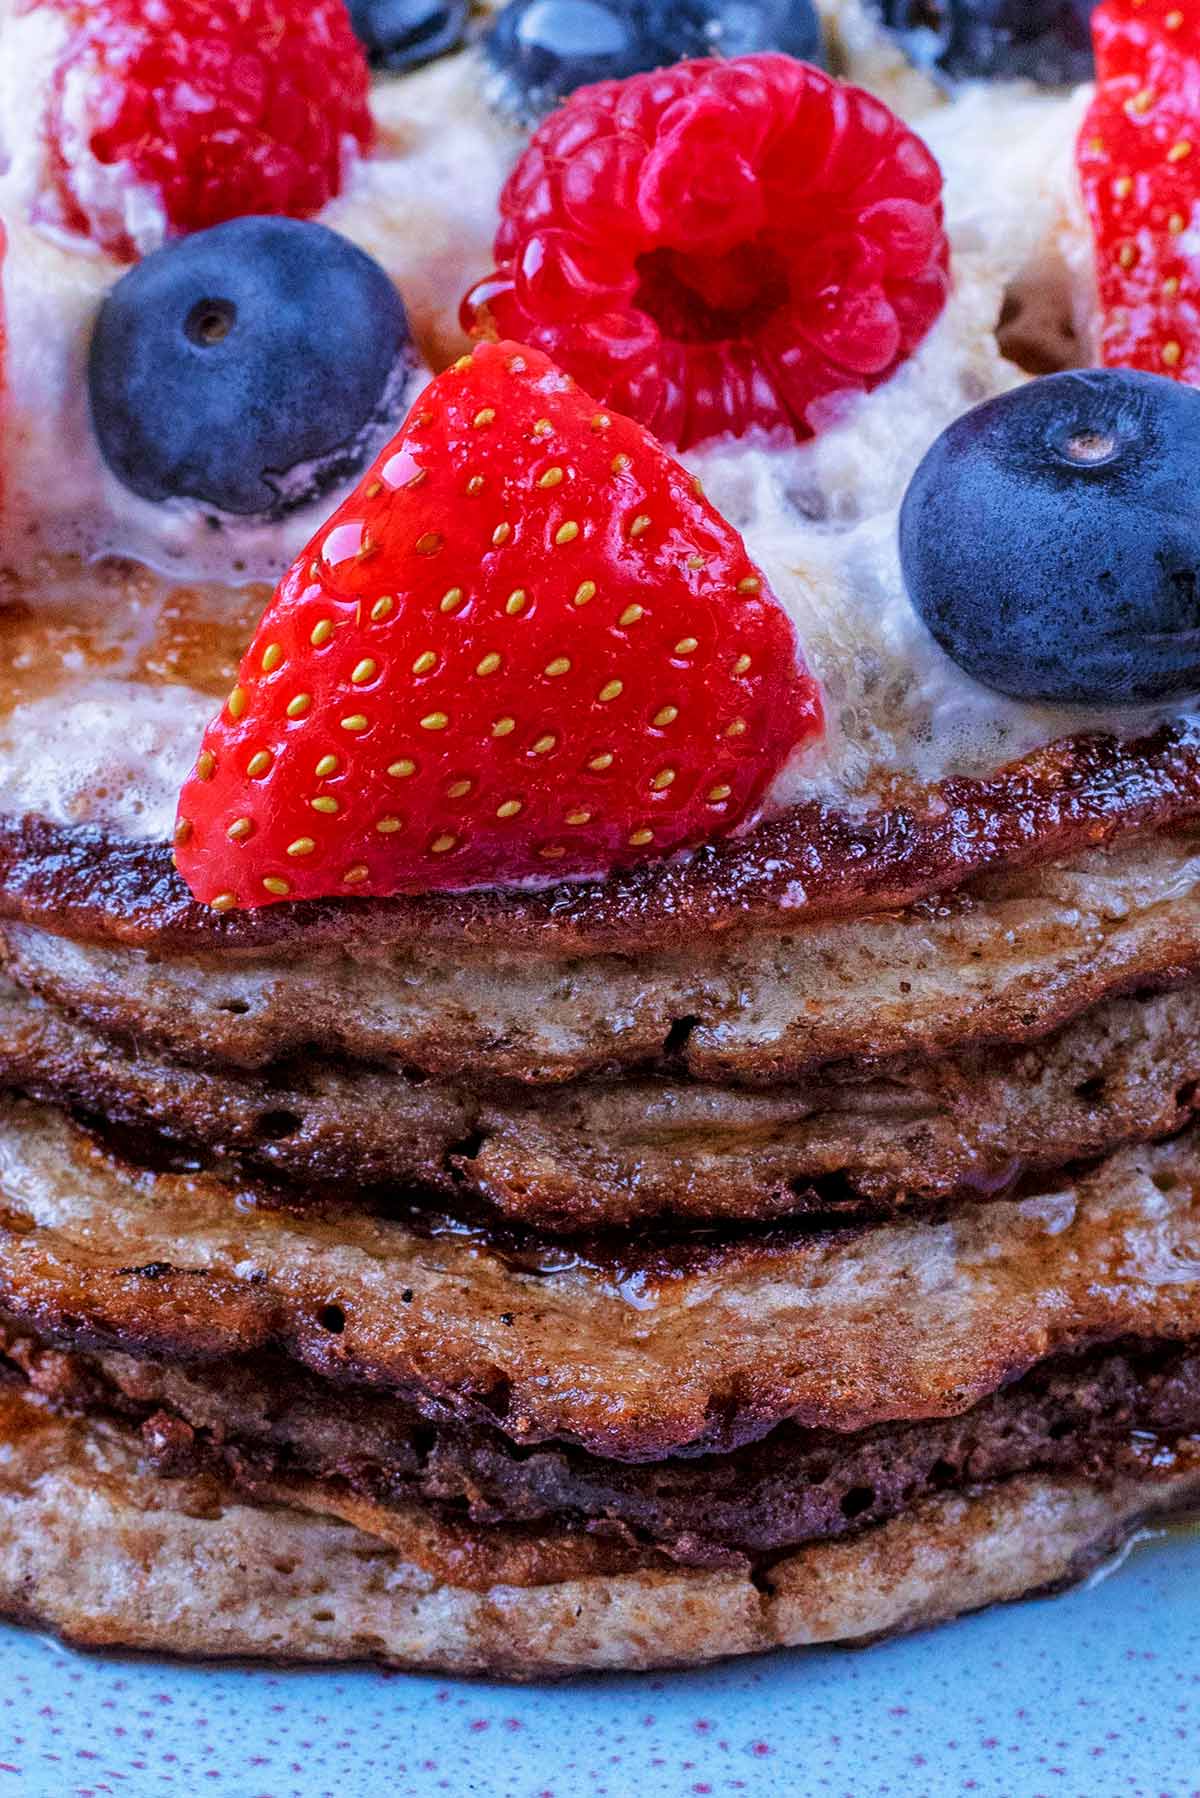 A stack of six pancakes with cream, strawberries and blueberries.